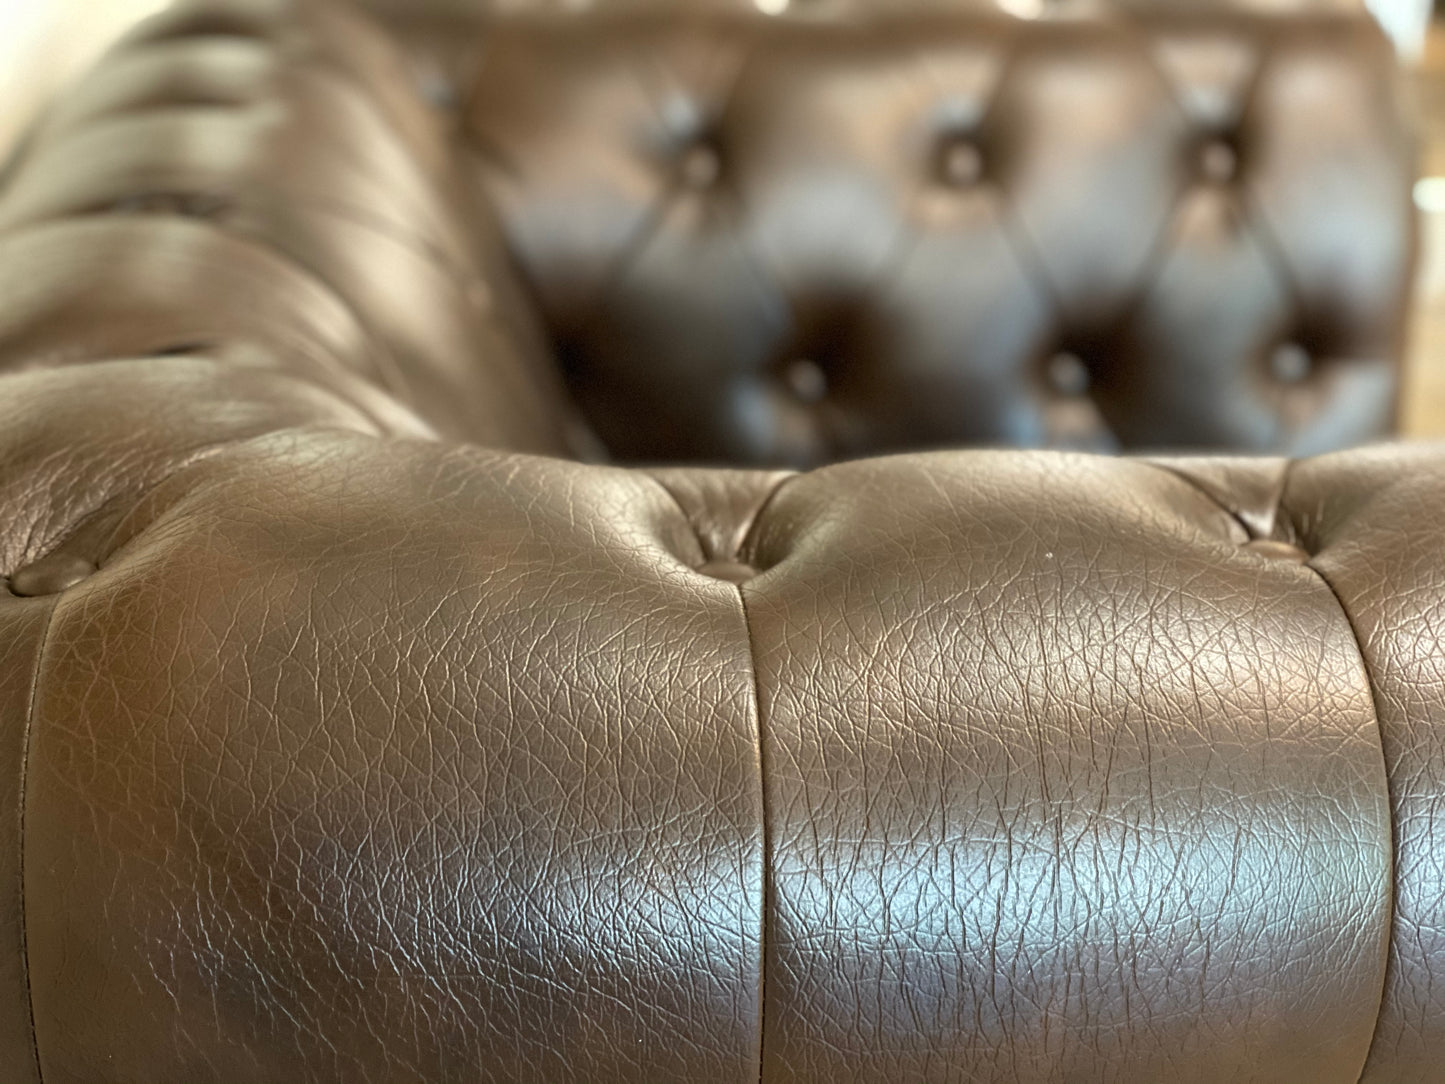 1 Seater Chesterfield Lounge - Brown